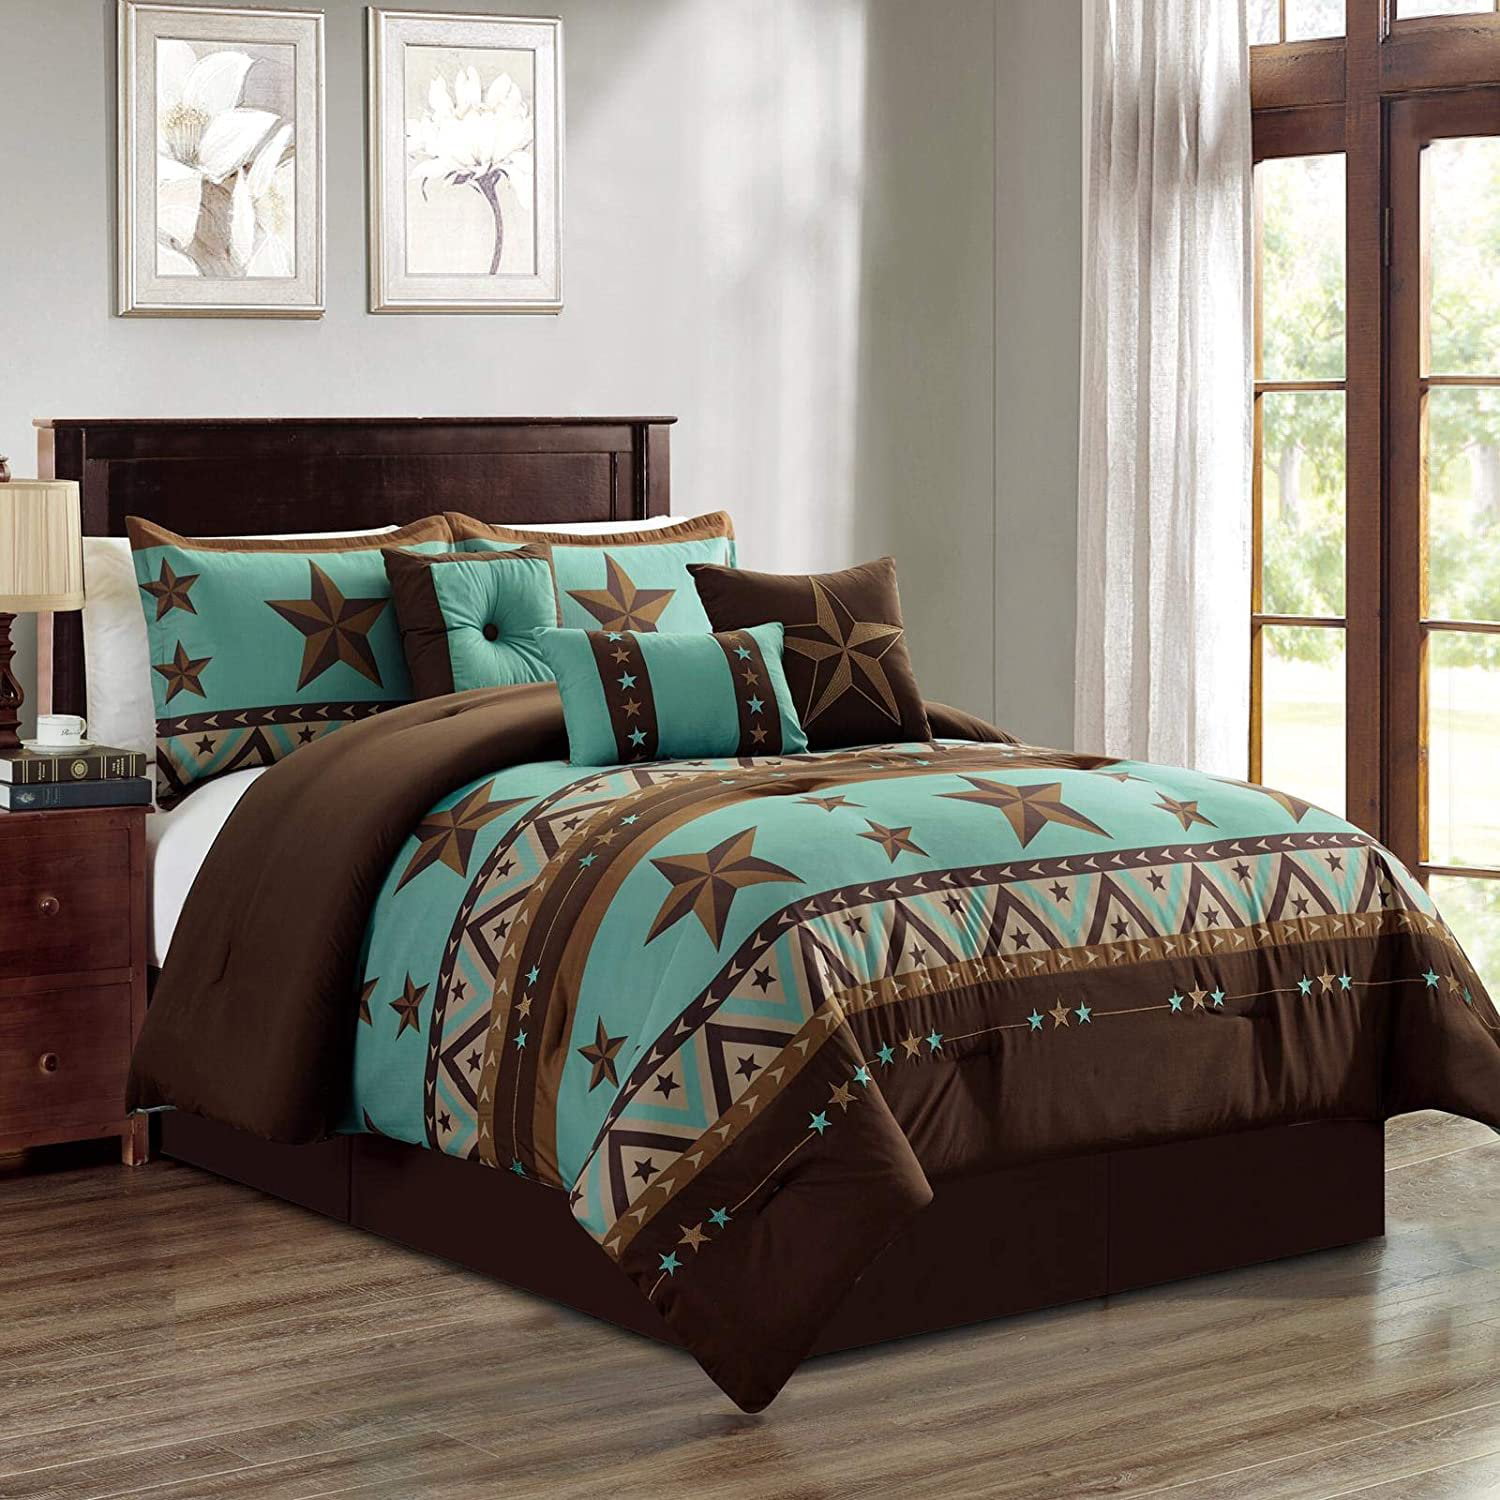 Western Turquoise Cross 5 Piece Comforter Bedding Set With Sheet Option! 